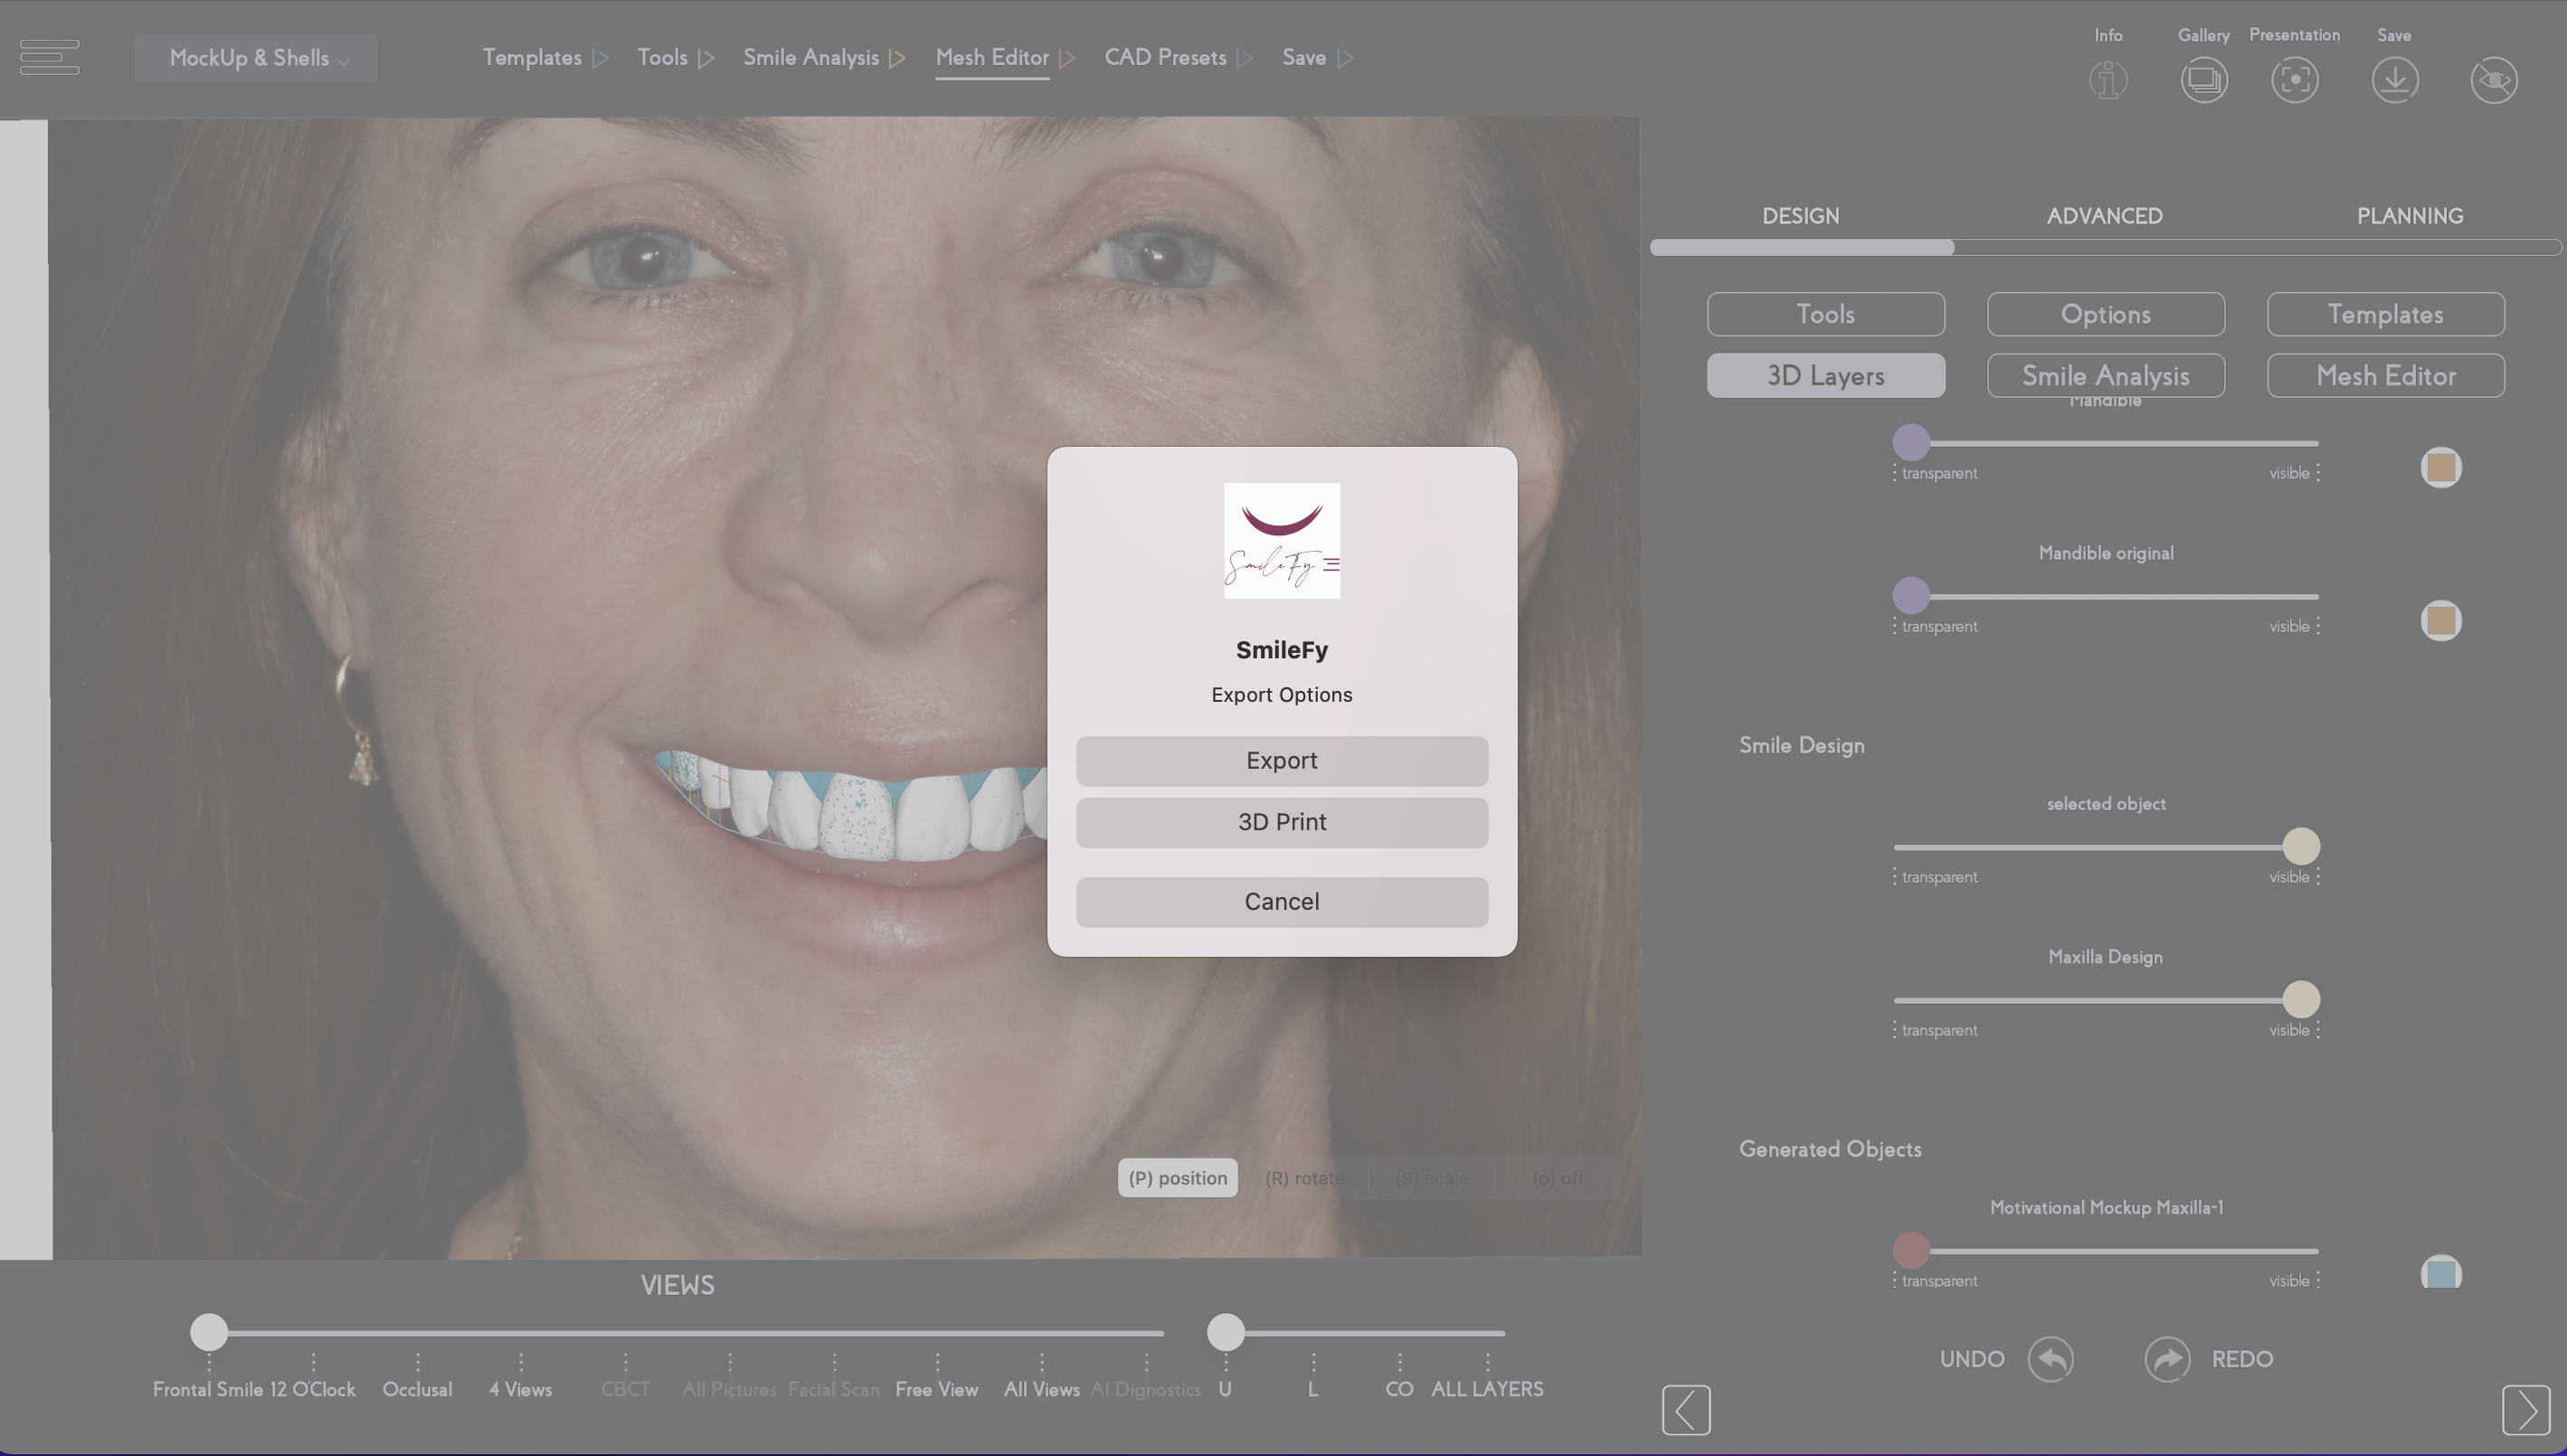 Printed Models + in-mouth Smile Trial:    A silicone key was fabricated to create a mock-up out of bis-acryl resin. The mock-up was placed onto the patient’s teeth, and when shown to her, she expressed how satisfied she was with the aesthetics and natural look of her new smile.